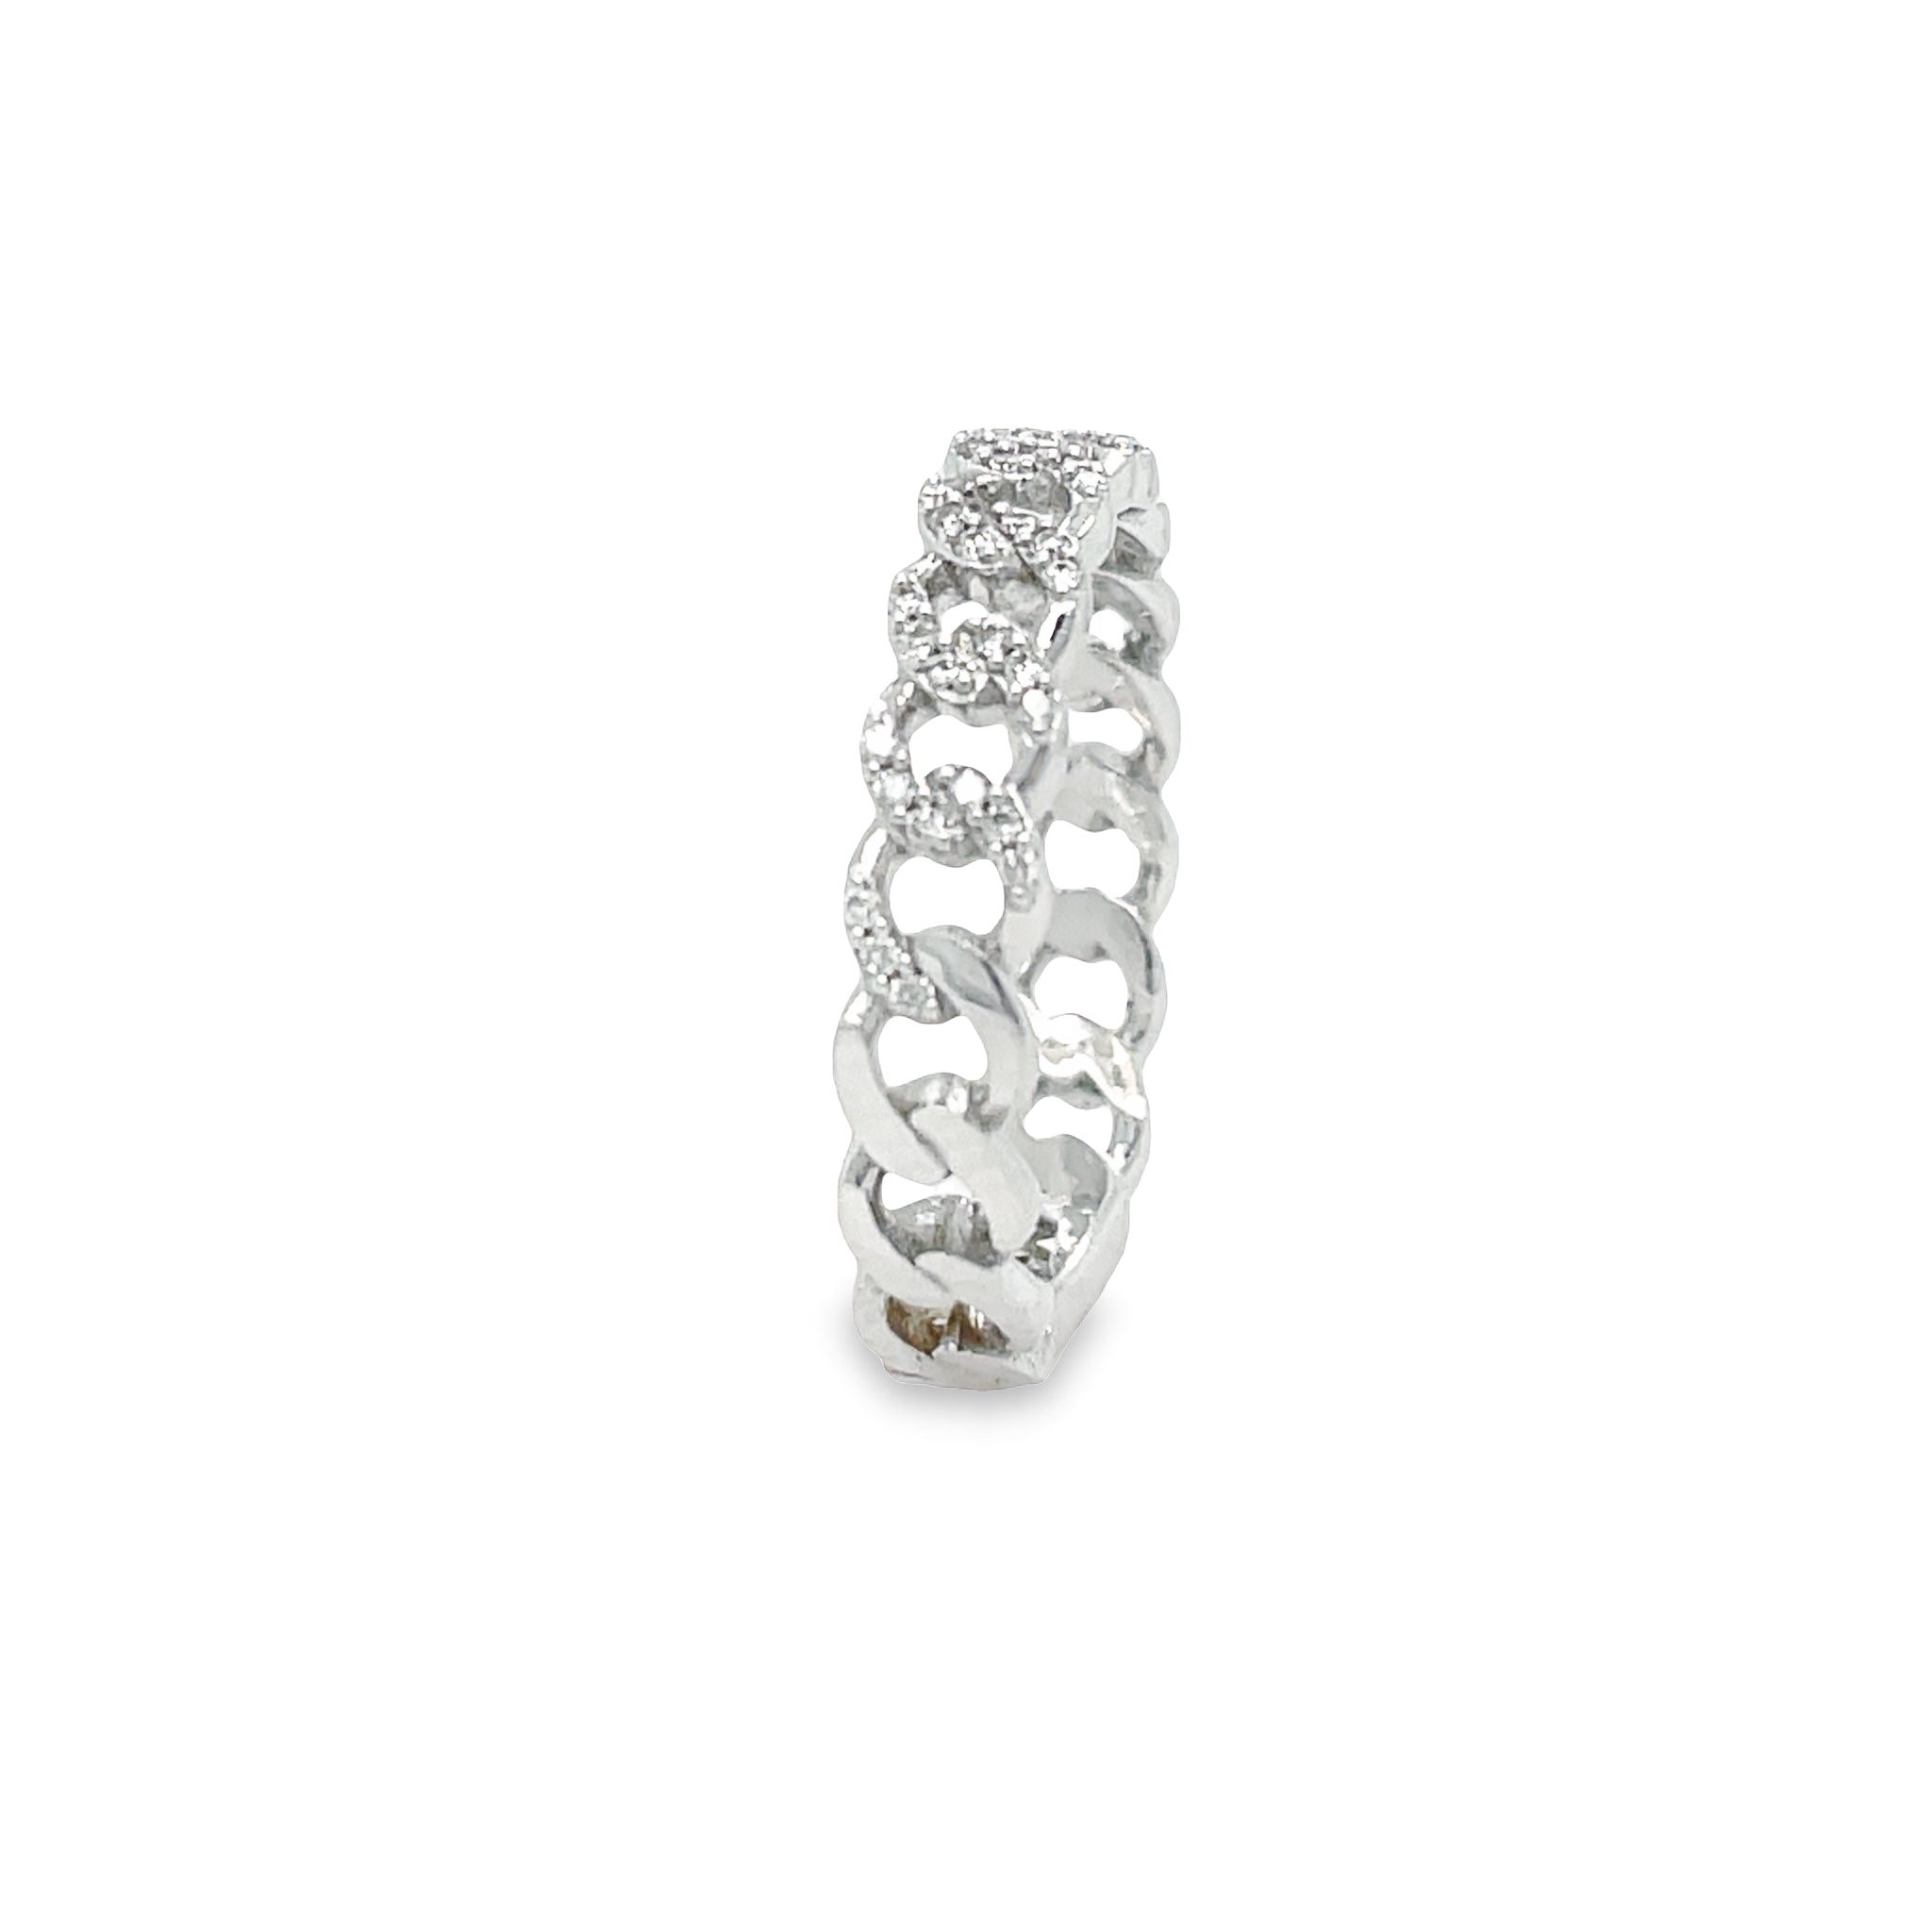 This beautiful diamond white gold ring from Pave Chain Link is crafted from 14k white gold. It's 4.00 mm wide, with 0.14 cts of round diamonds adding a brilliant sparkle. With its elegant look and quality craftsmanship, this ring is sure to stand out from the crowd.